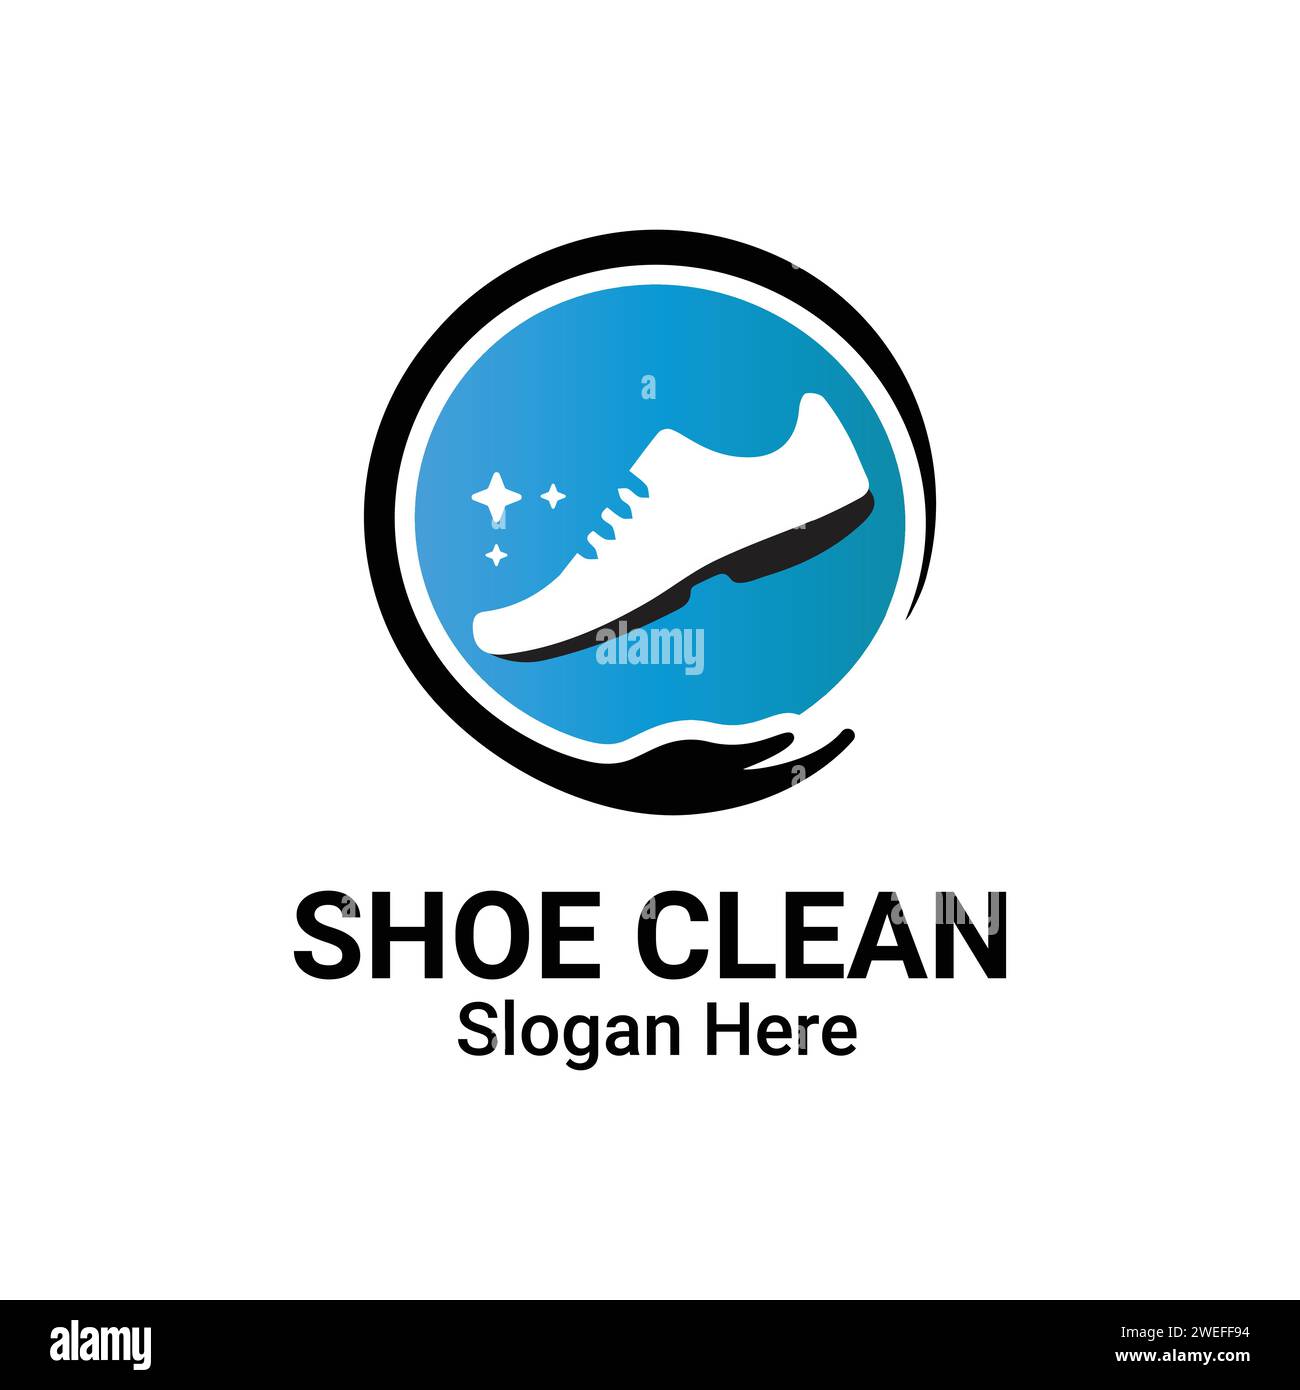 Cleaning Shoe Wash Laundry Business Logo Template. Shoe Clean And Shoe Care Icon Symbol Monoline line illustration vector Picture  Shows Washing Shoes. Stock Vector